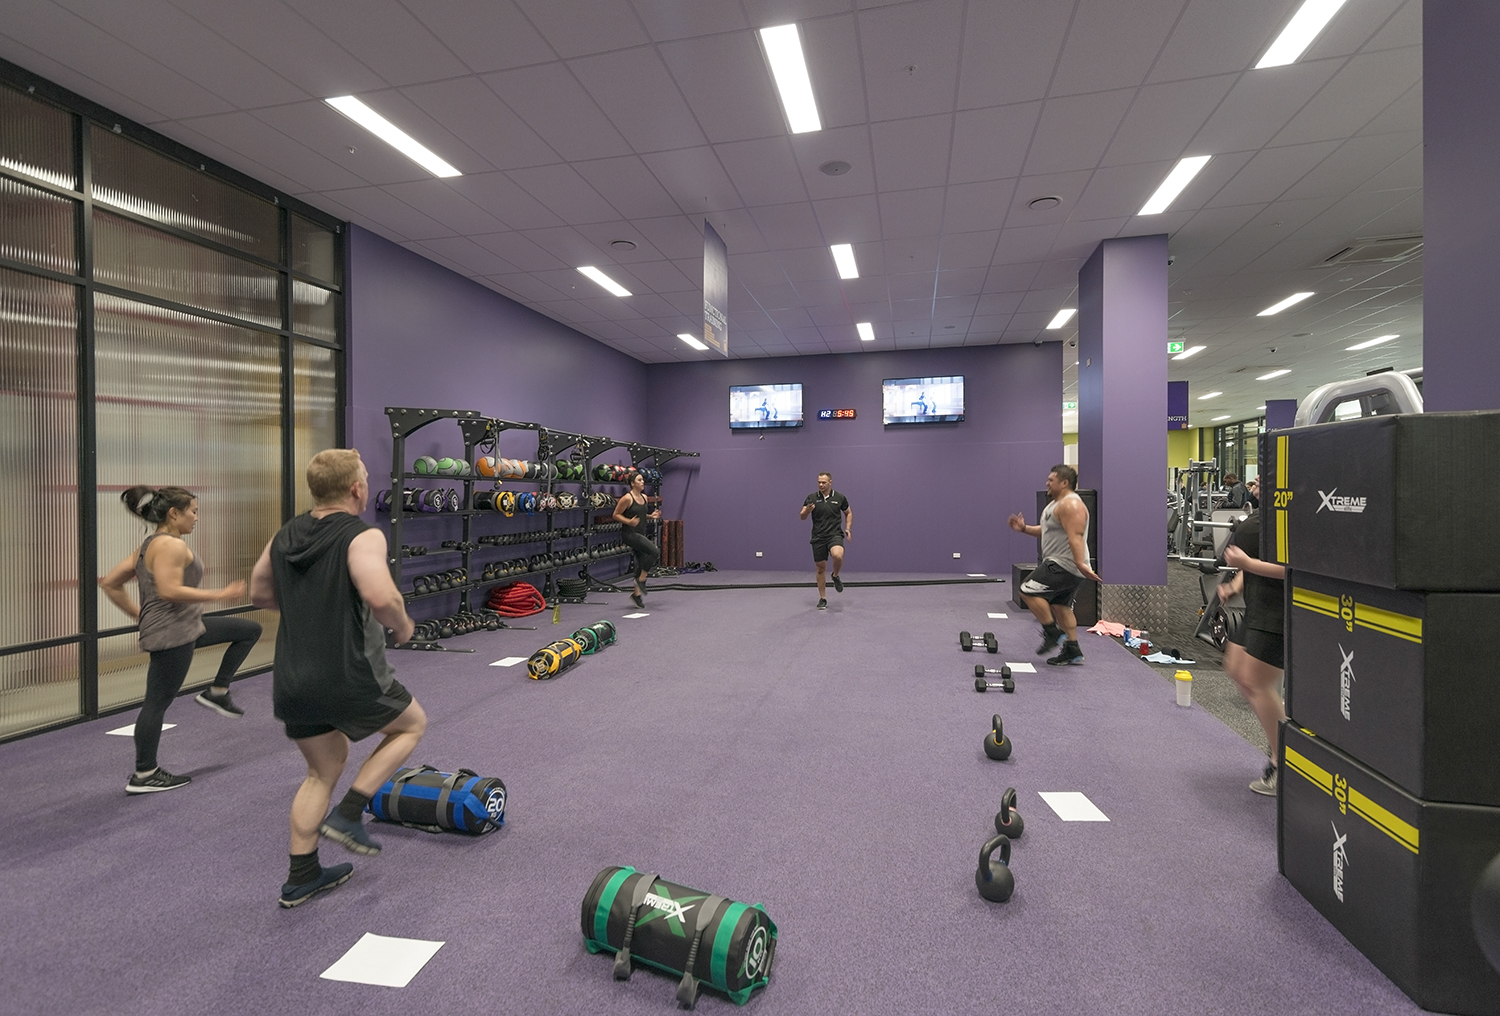 5 Day Anytime fitness gym membership prices sydney for Gym